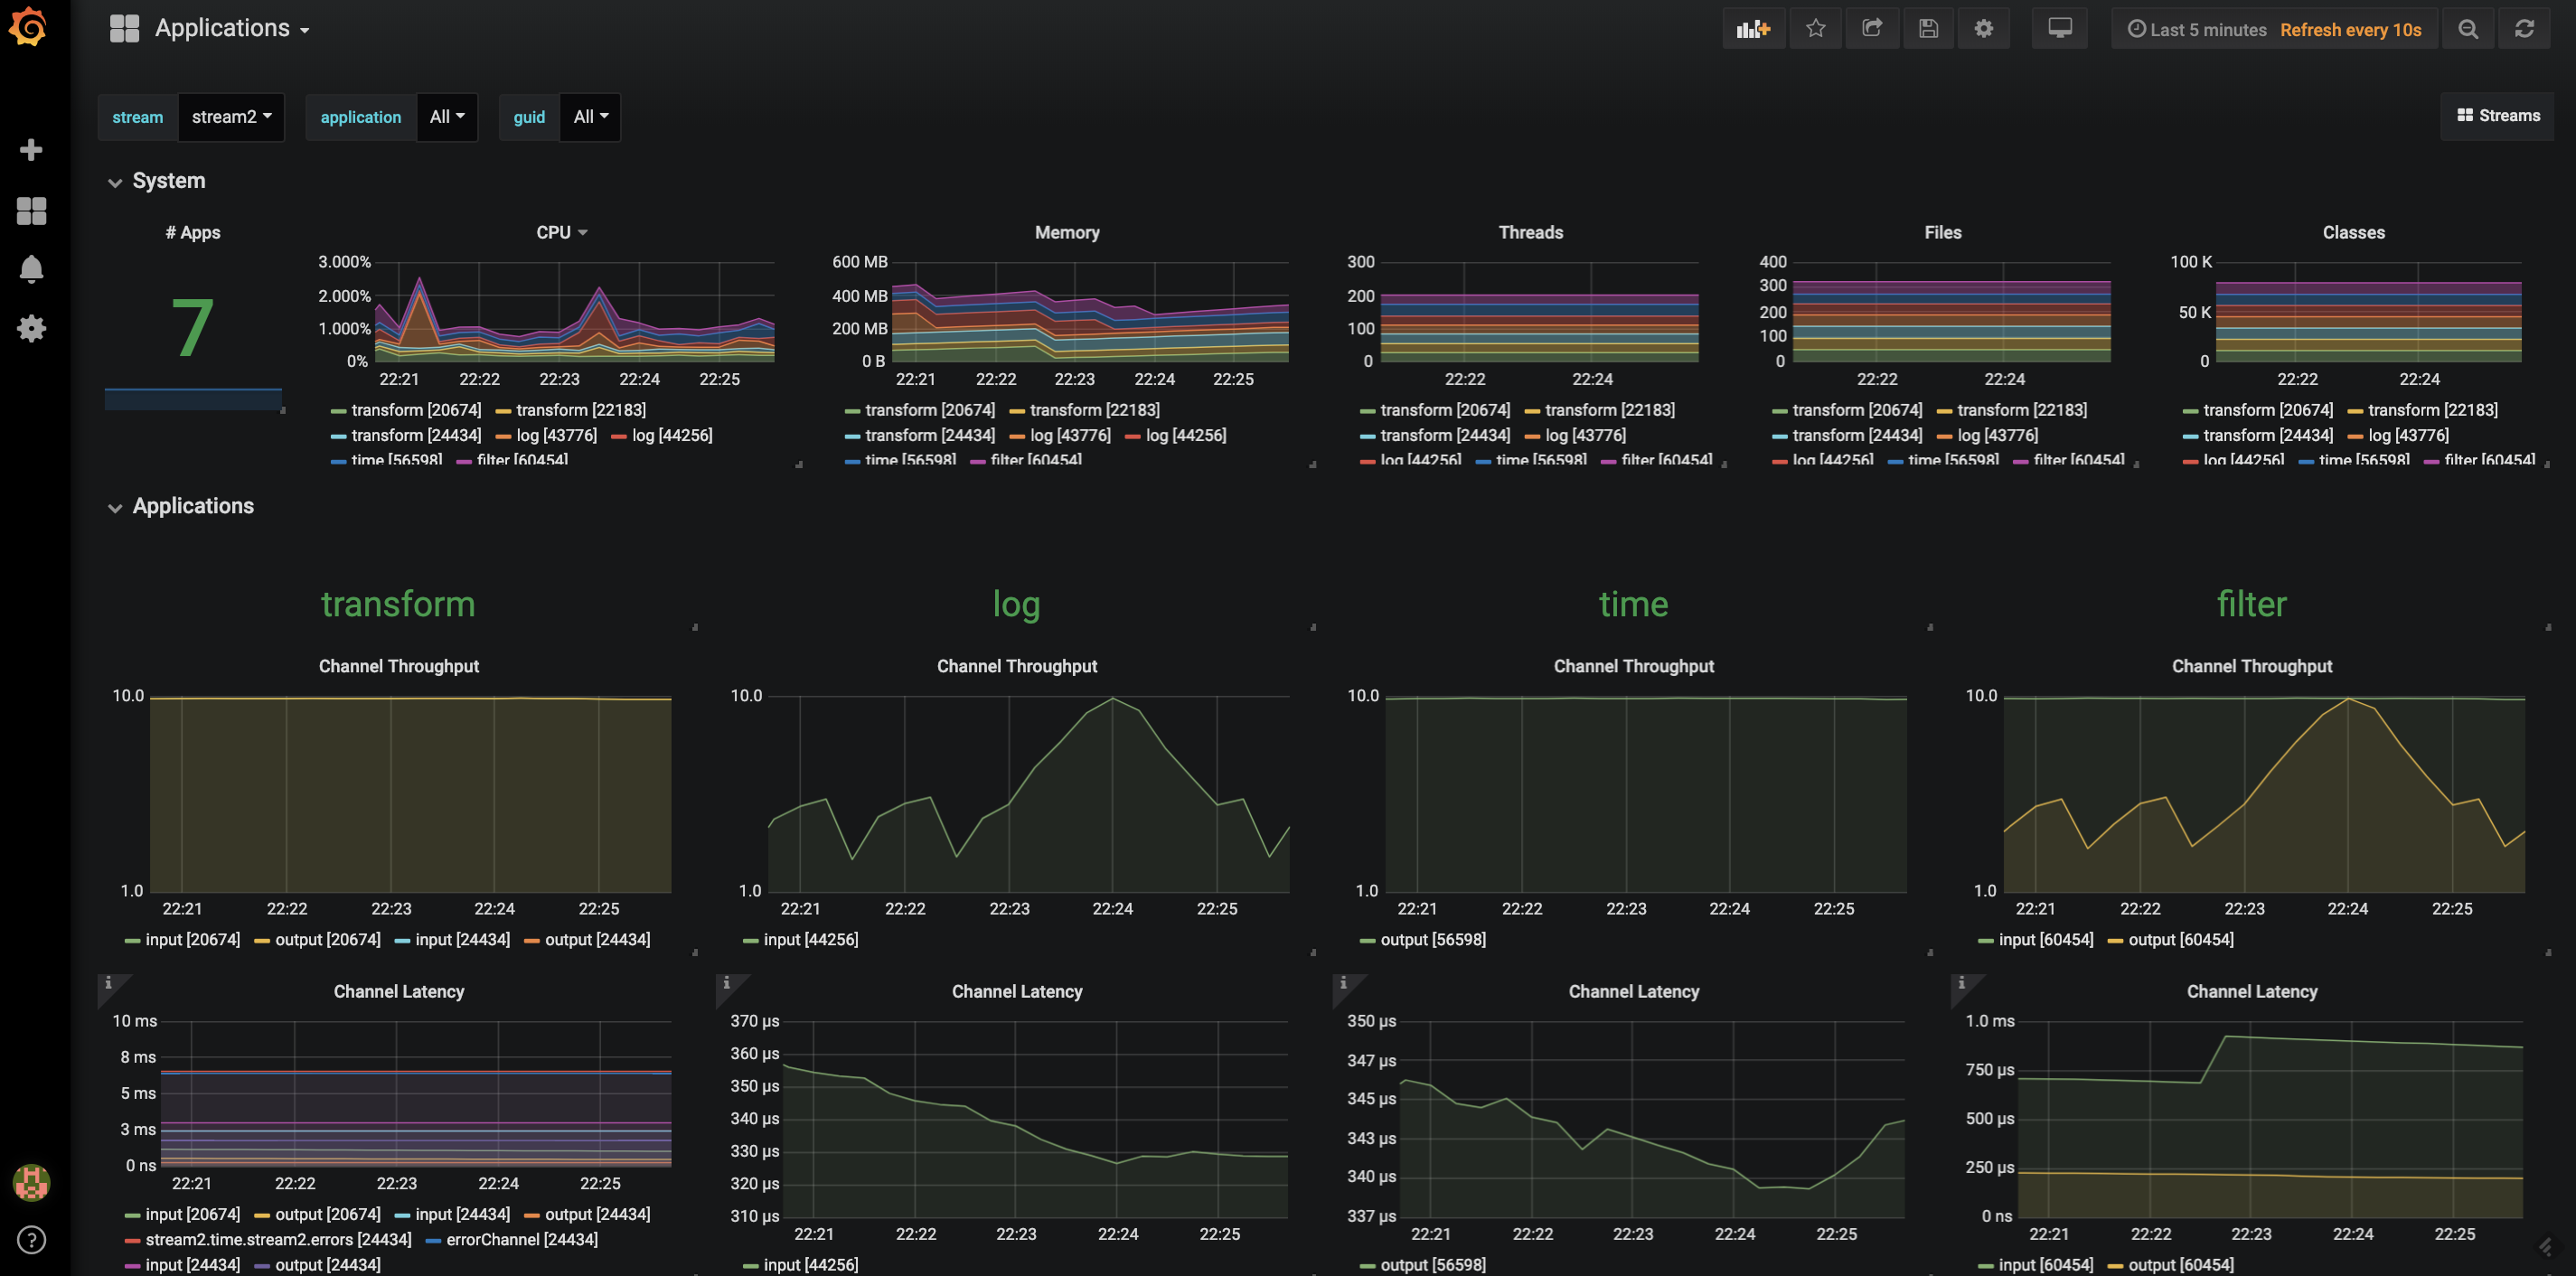 Grafana Dashboard for applications in a stream deployed on Kubernetes